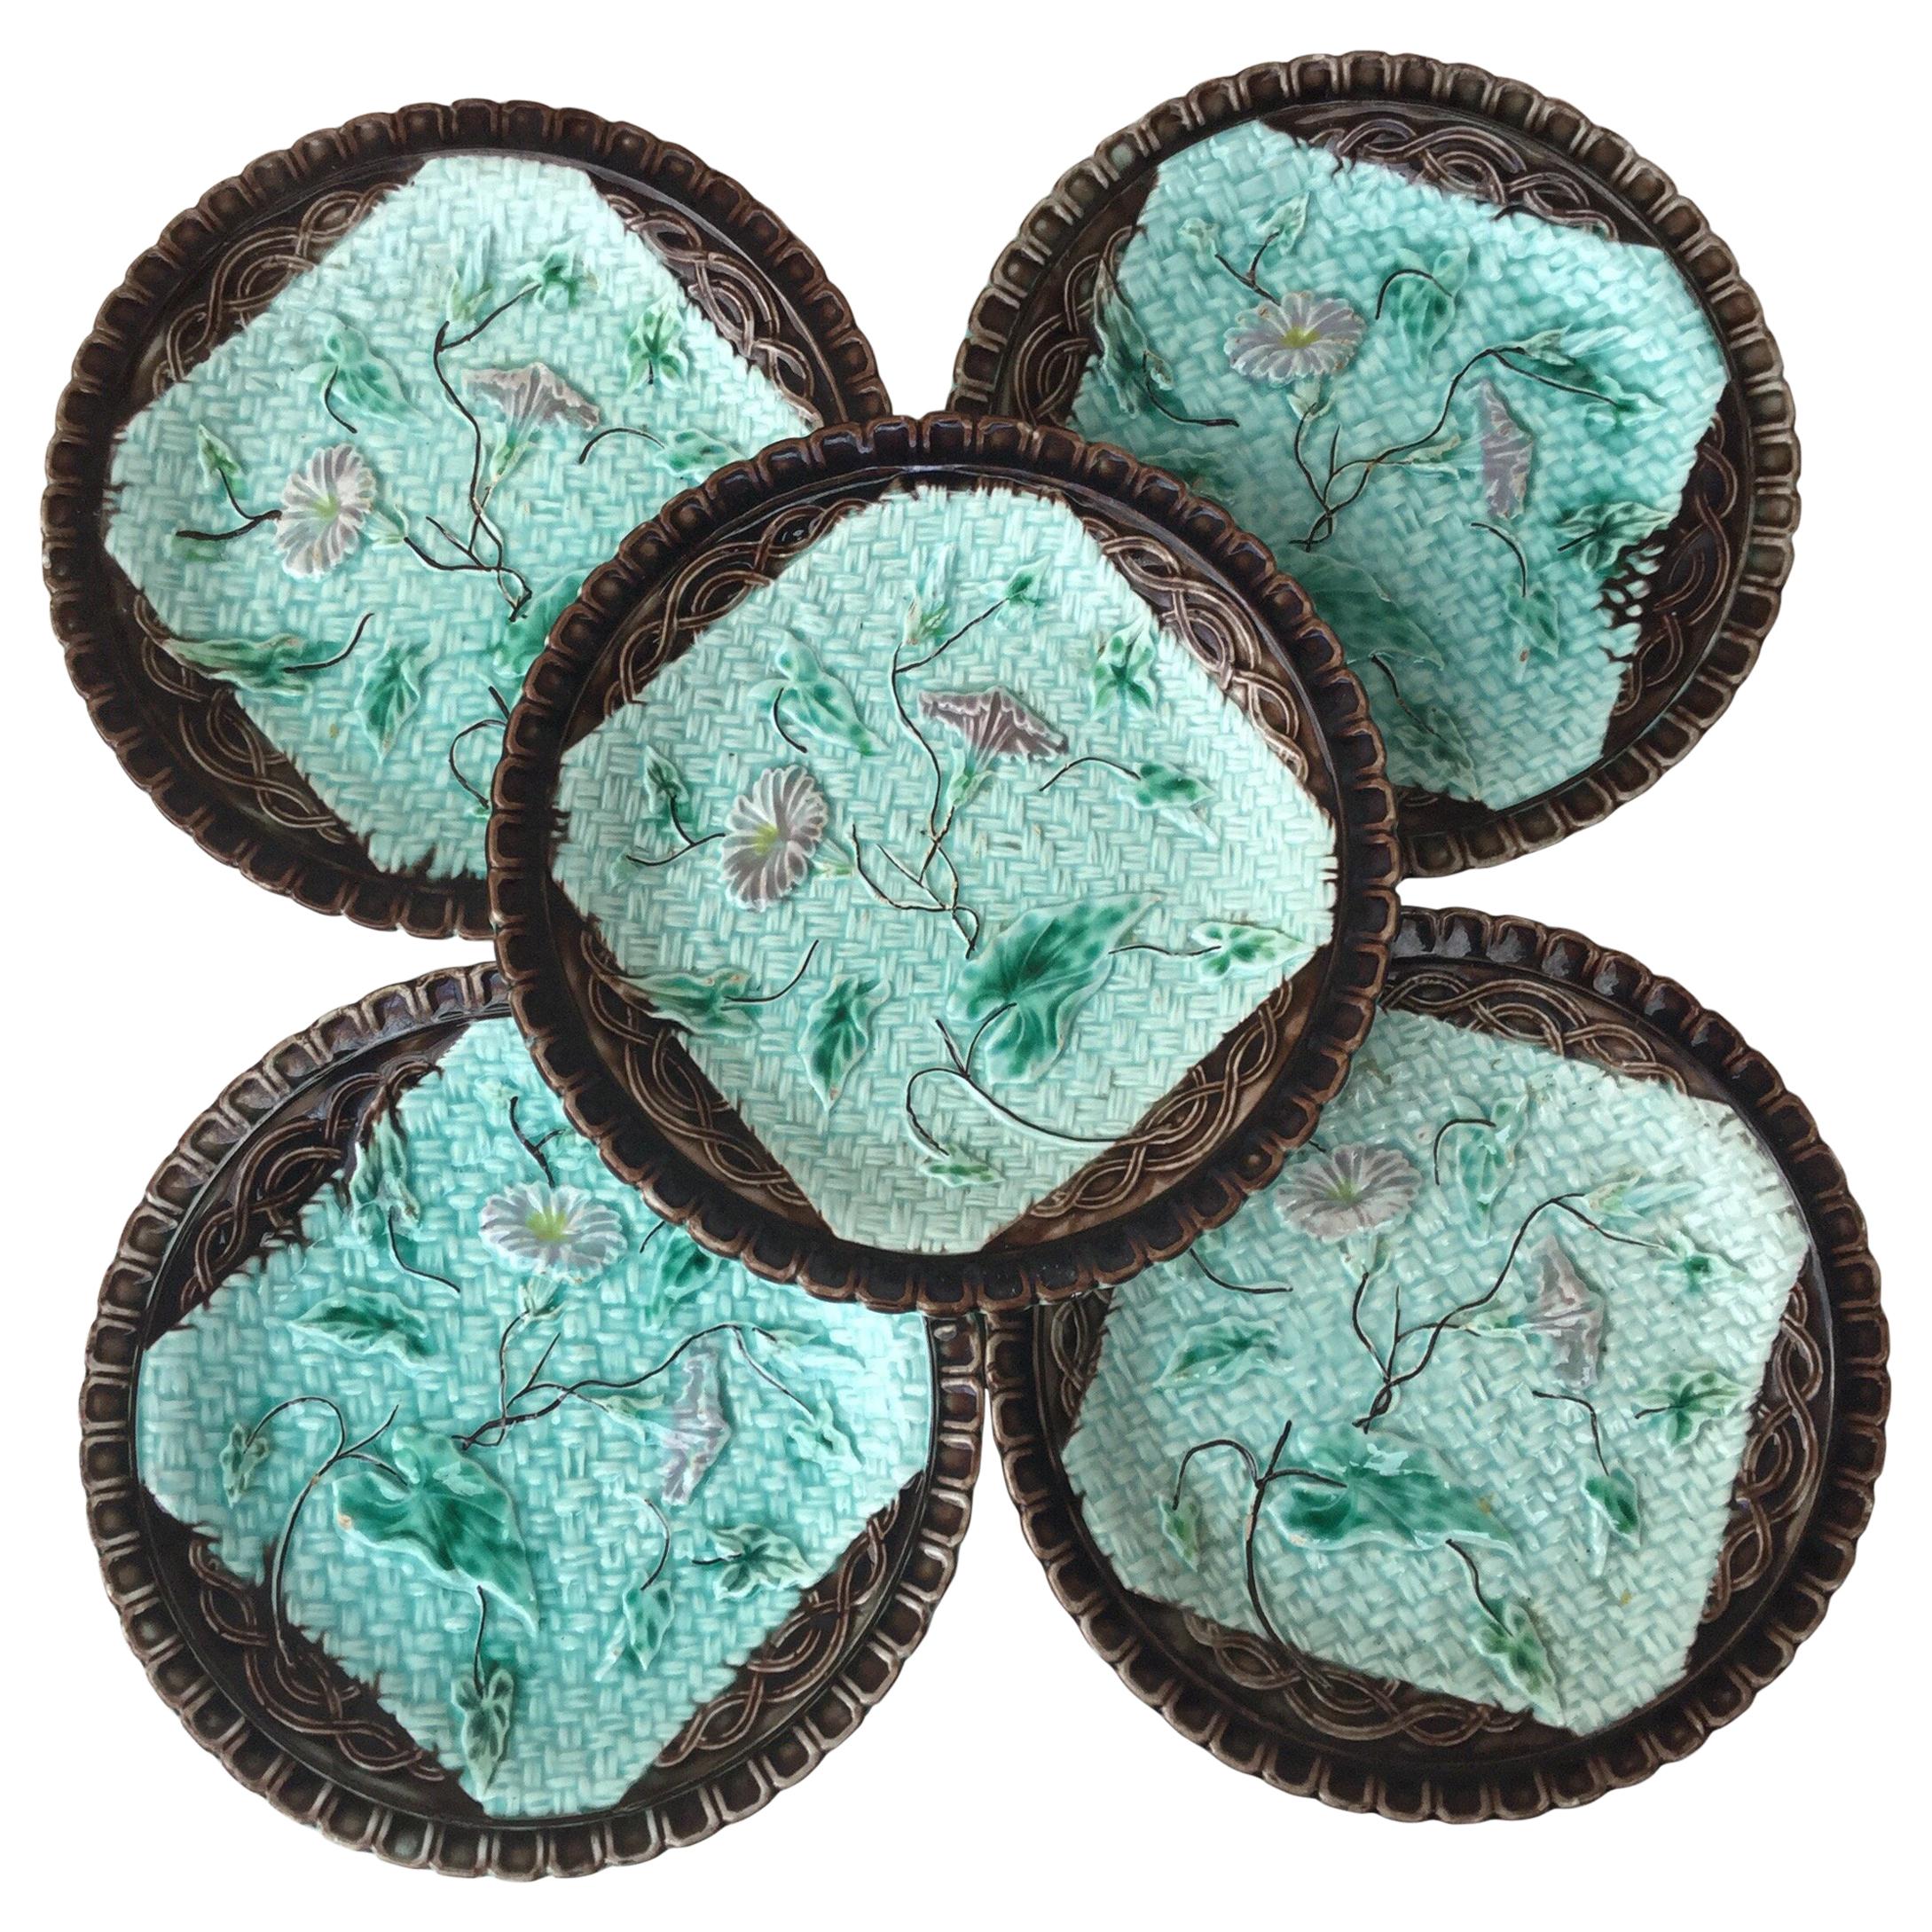 Set of 6 German Majolica plates with morning glory on a blue basket weave and a brown border, circa 1900.